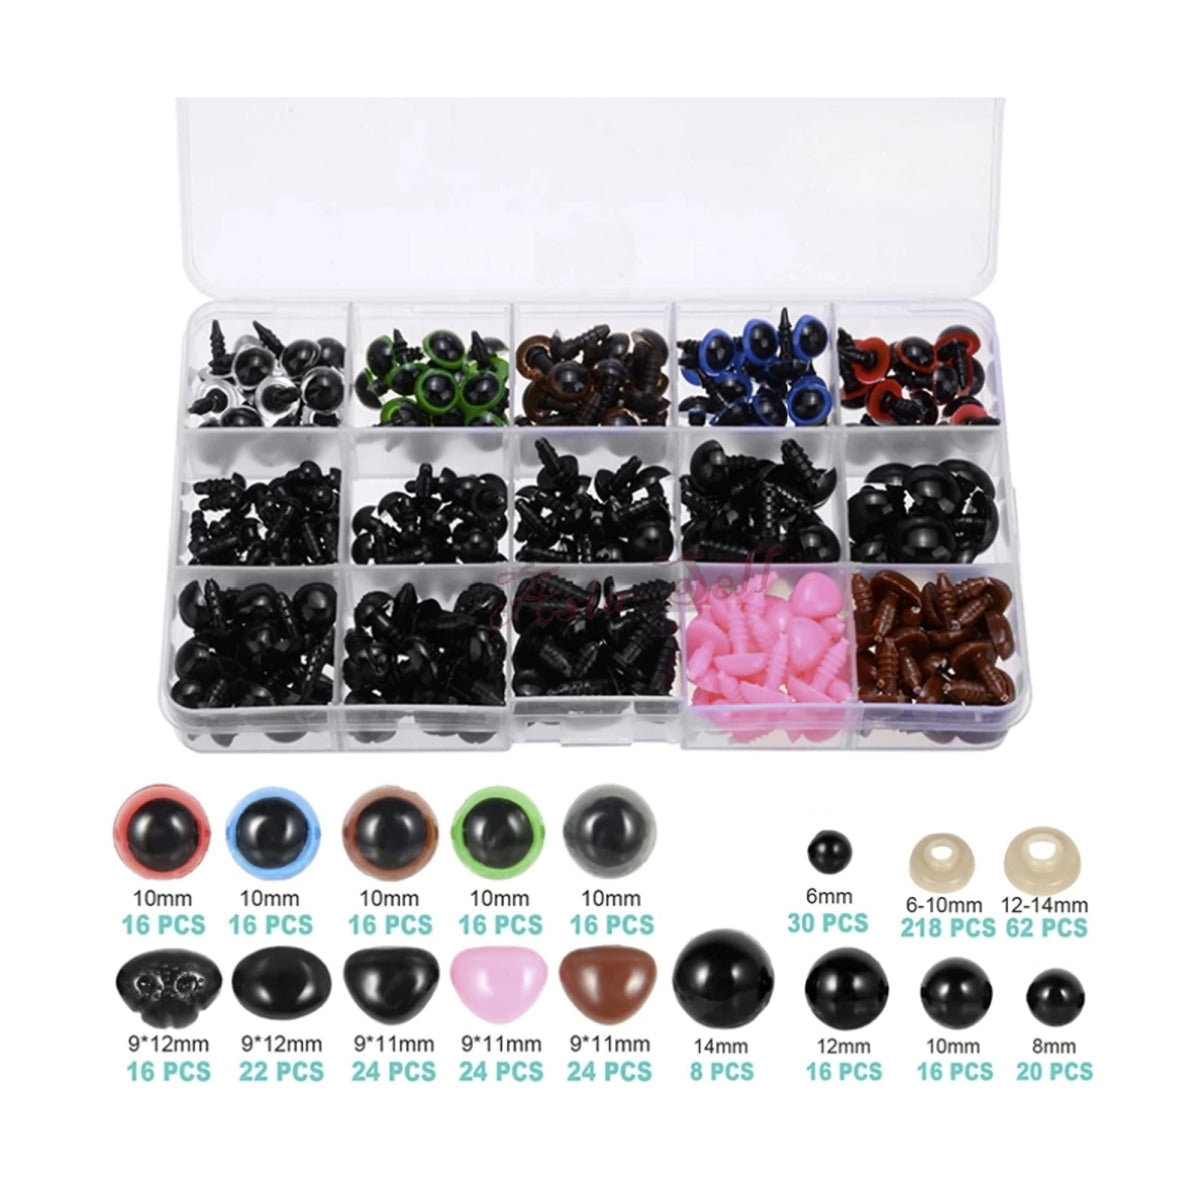 560Pcs Plastic Safety Toy Eyes And Noses For Teddy Dog Stuffed Animals Dolls Accessories -